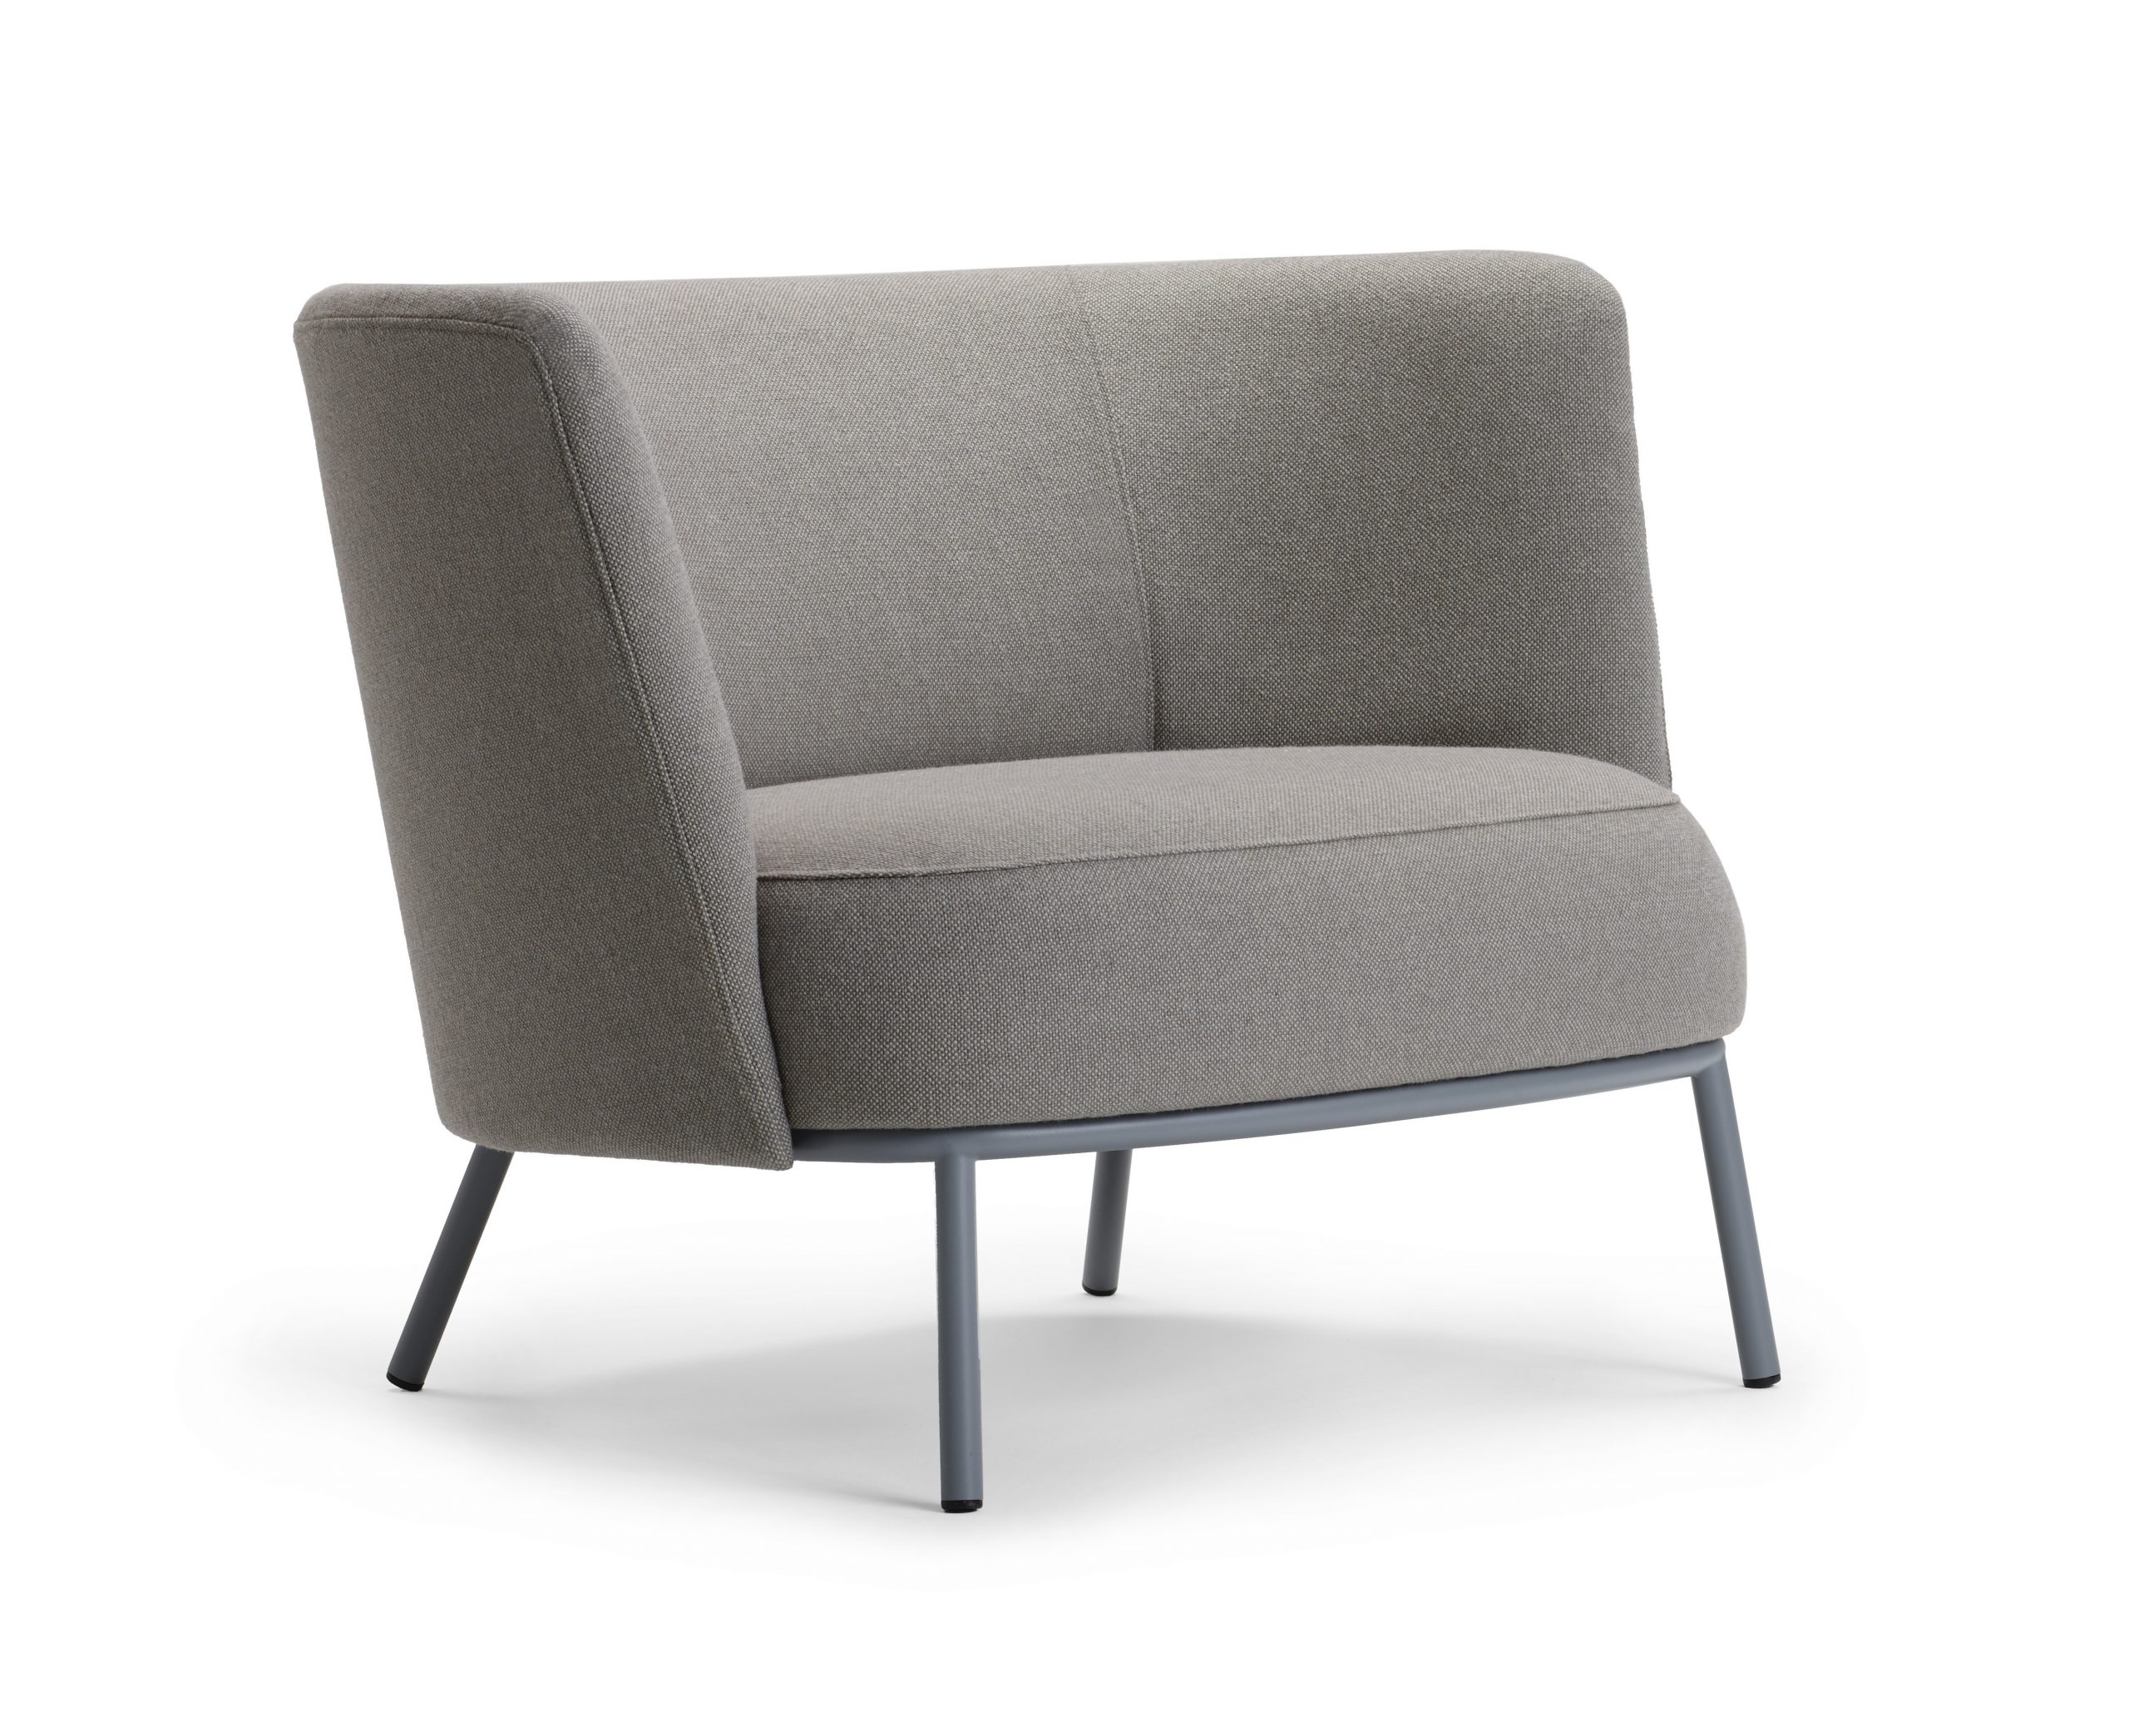 Shift easychair low by Debiasi Sandri for Offecct